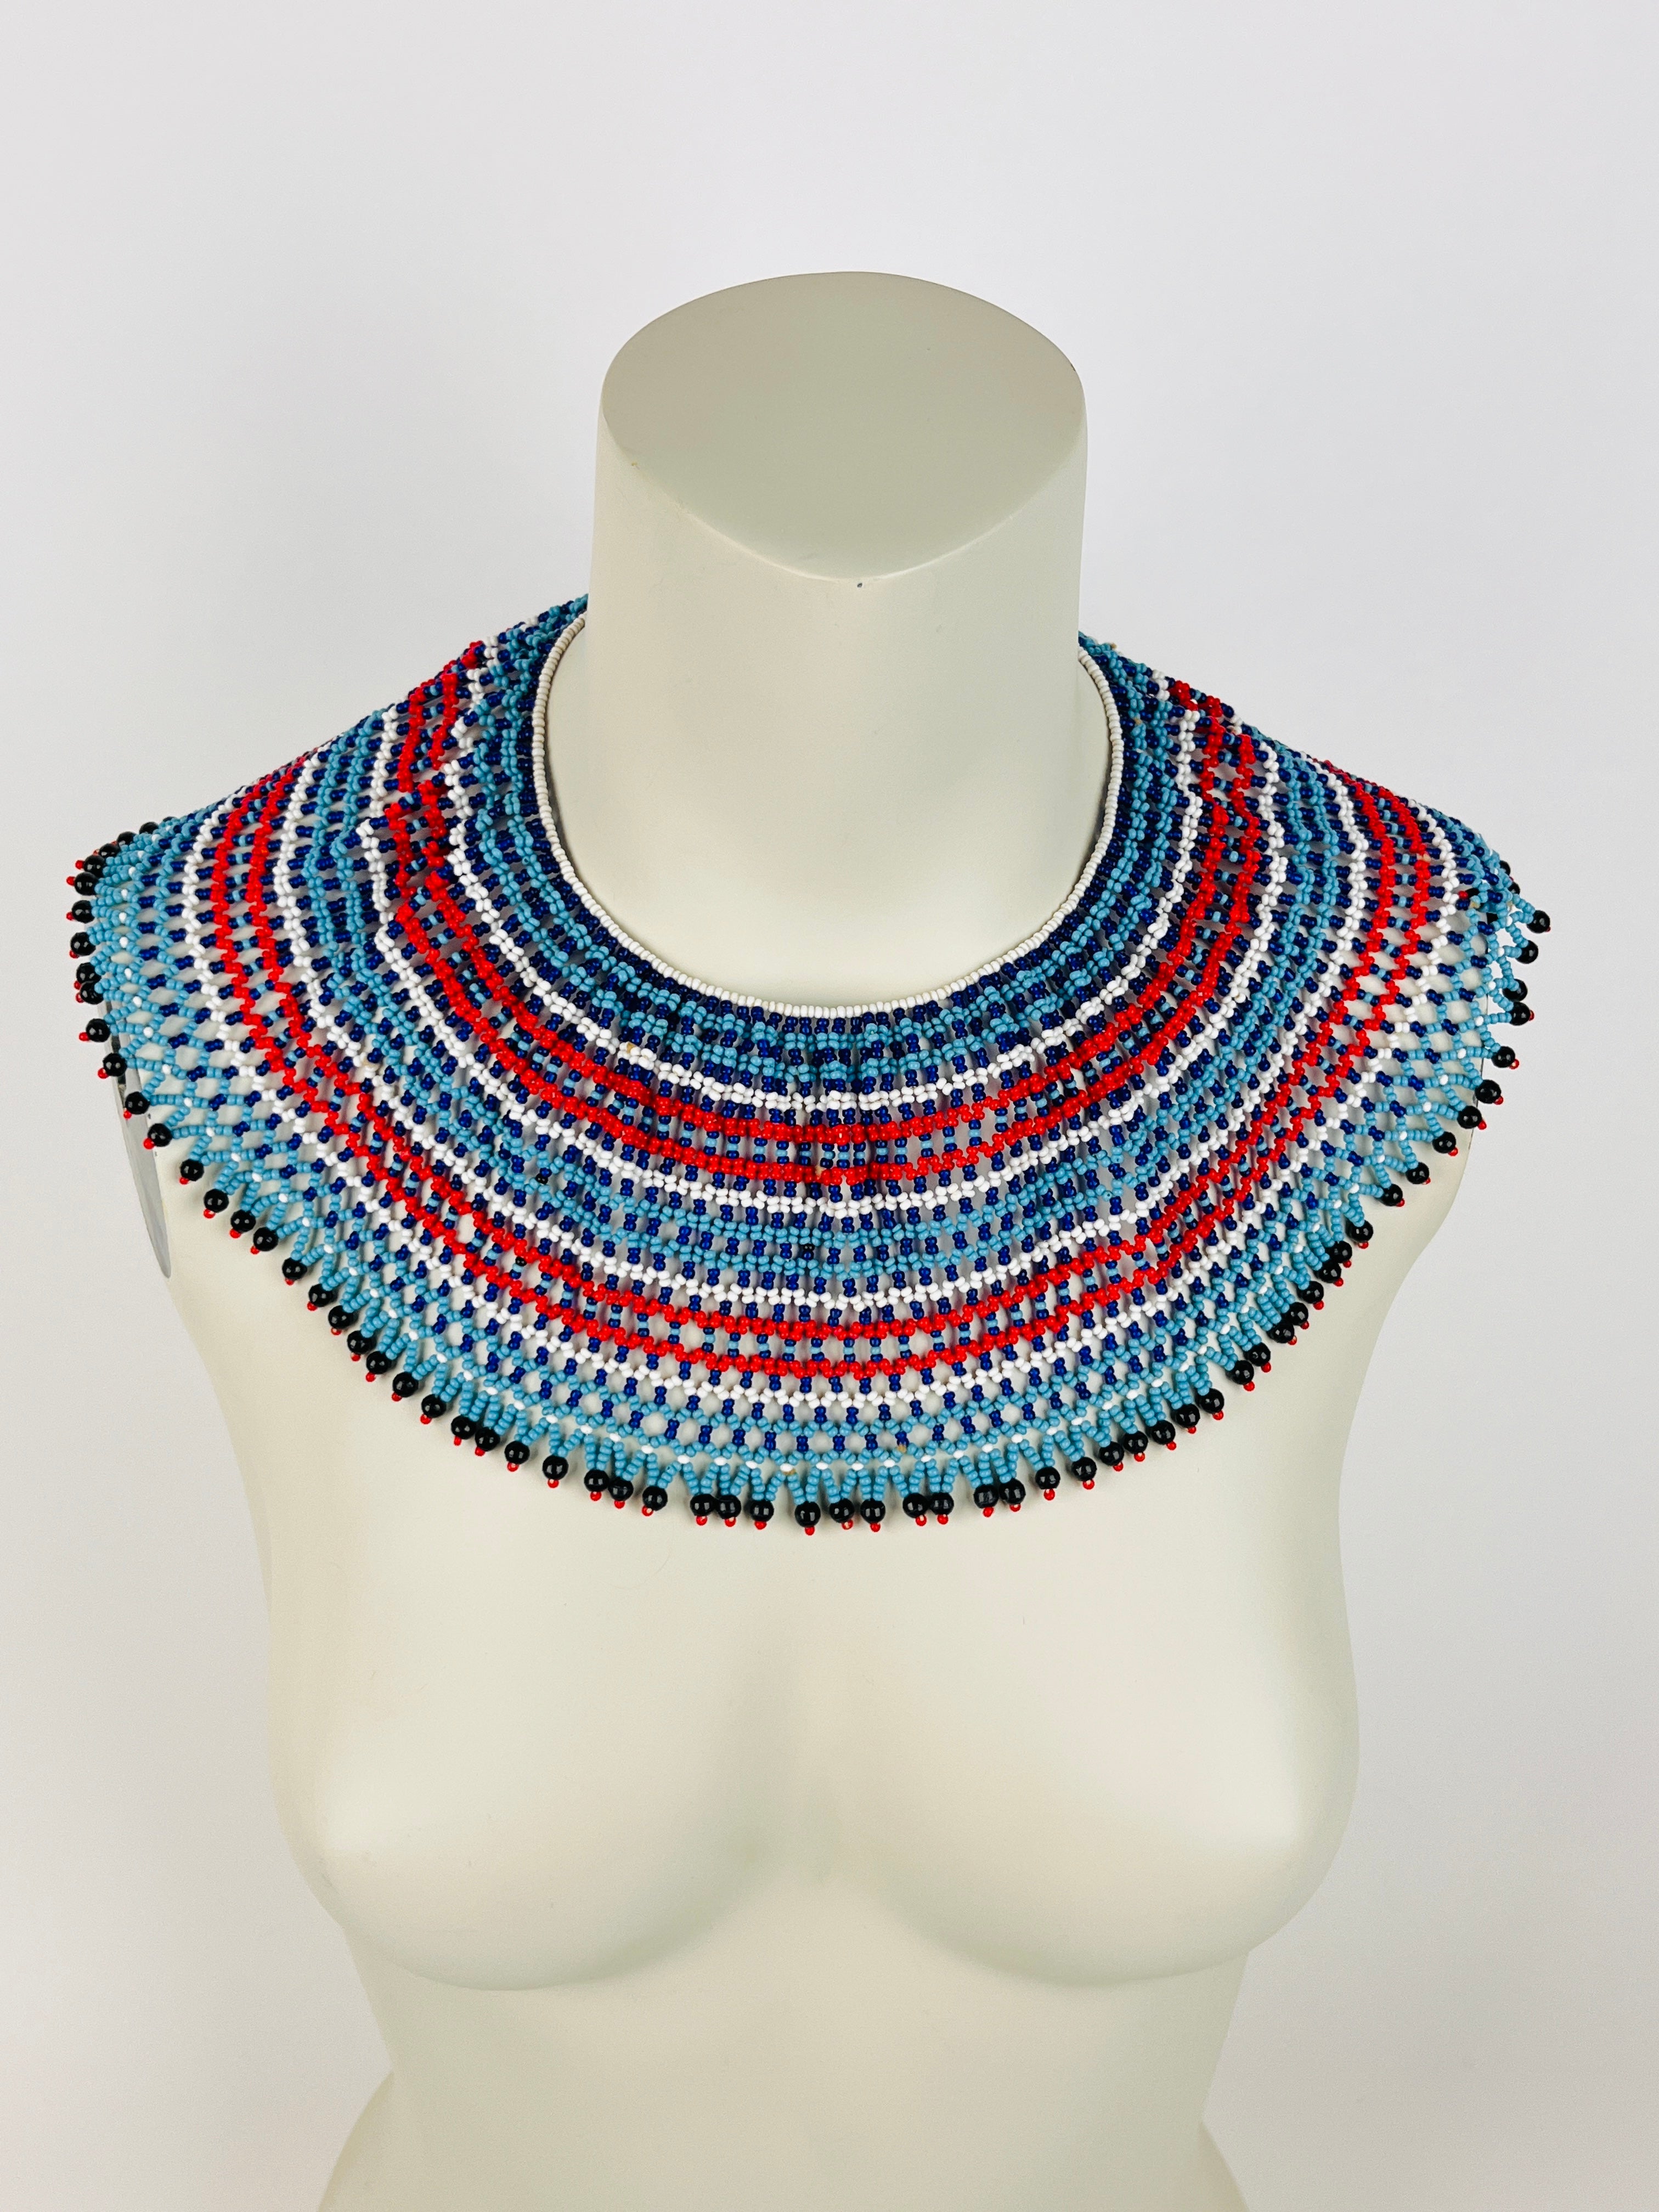 Buy ON SALE African Beaded Necklace, Zulu Necklace, Beaded Shawl Necklace, African  Jewelry, Masai Necklace, Women Necklace, Wedding Gift Online in India - Etsy